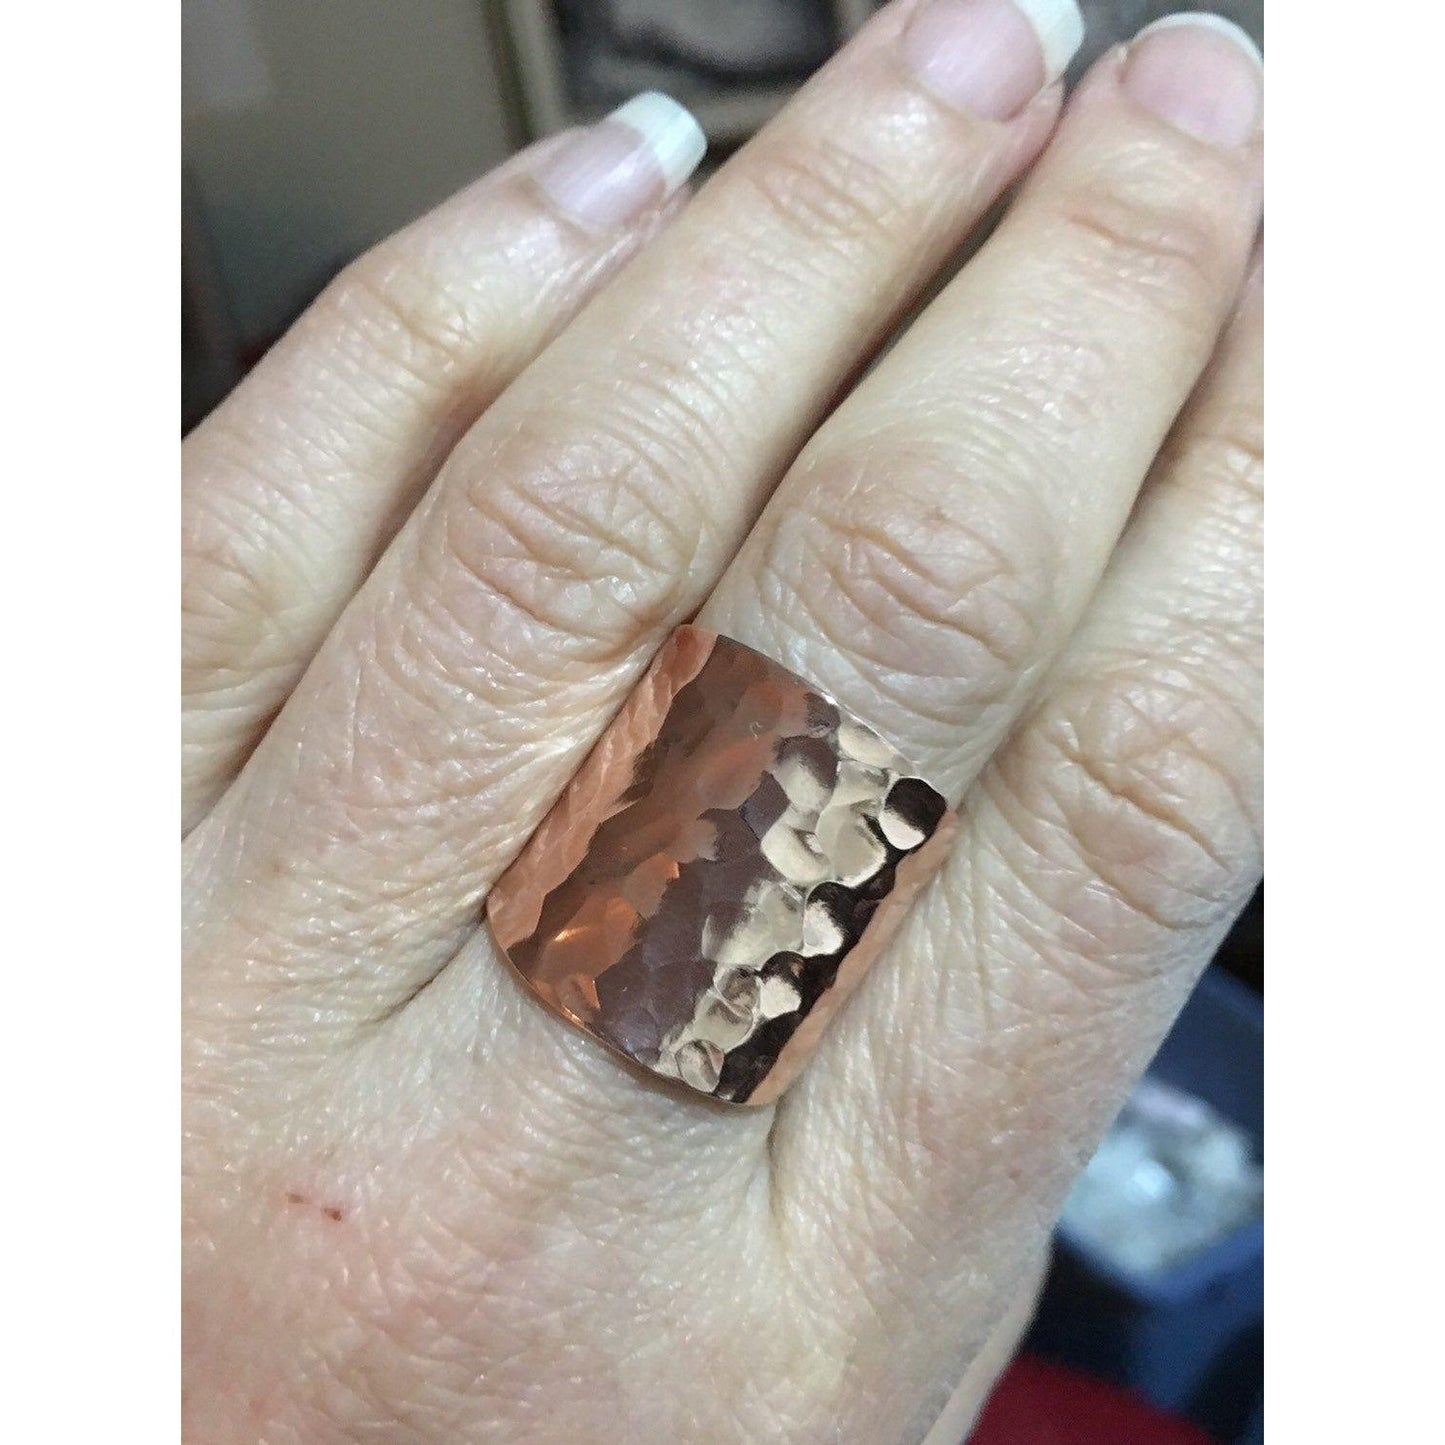 Hammered Copper Wide Band Cuff Ring